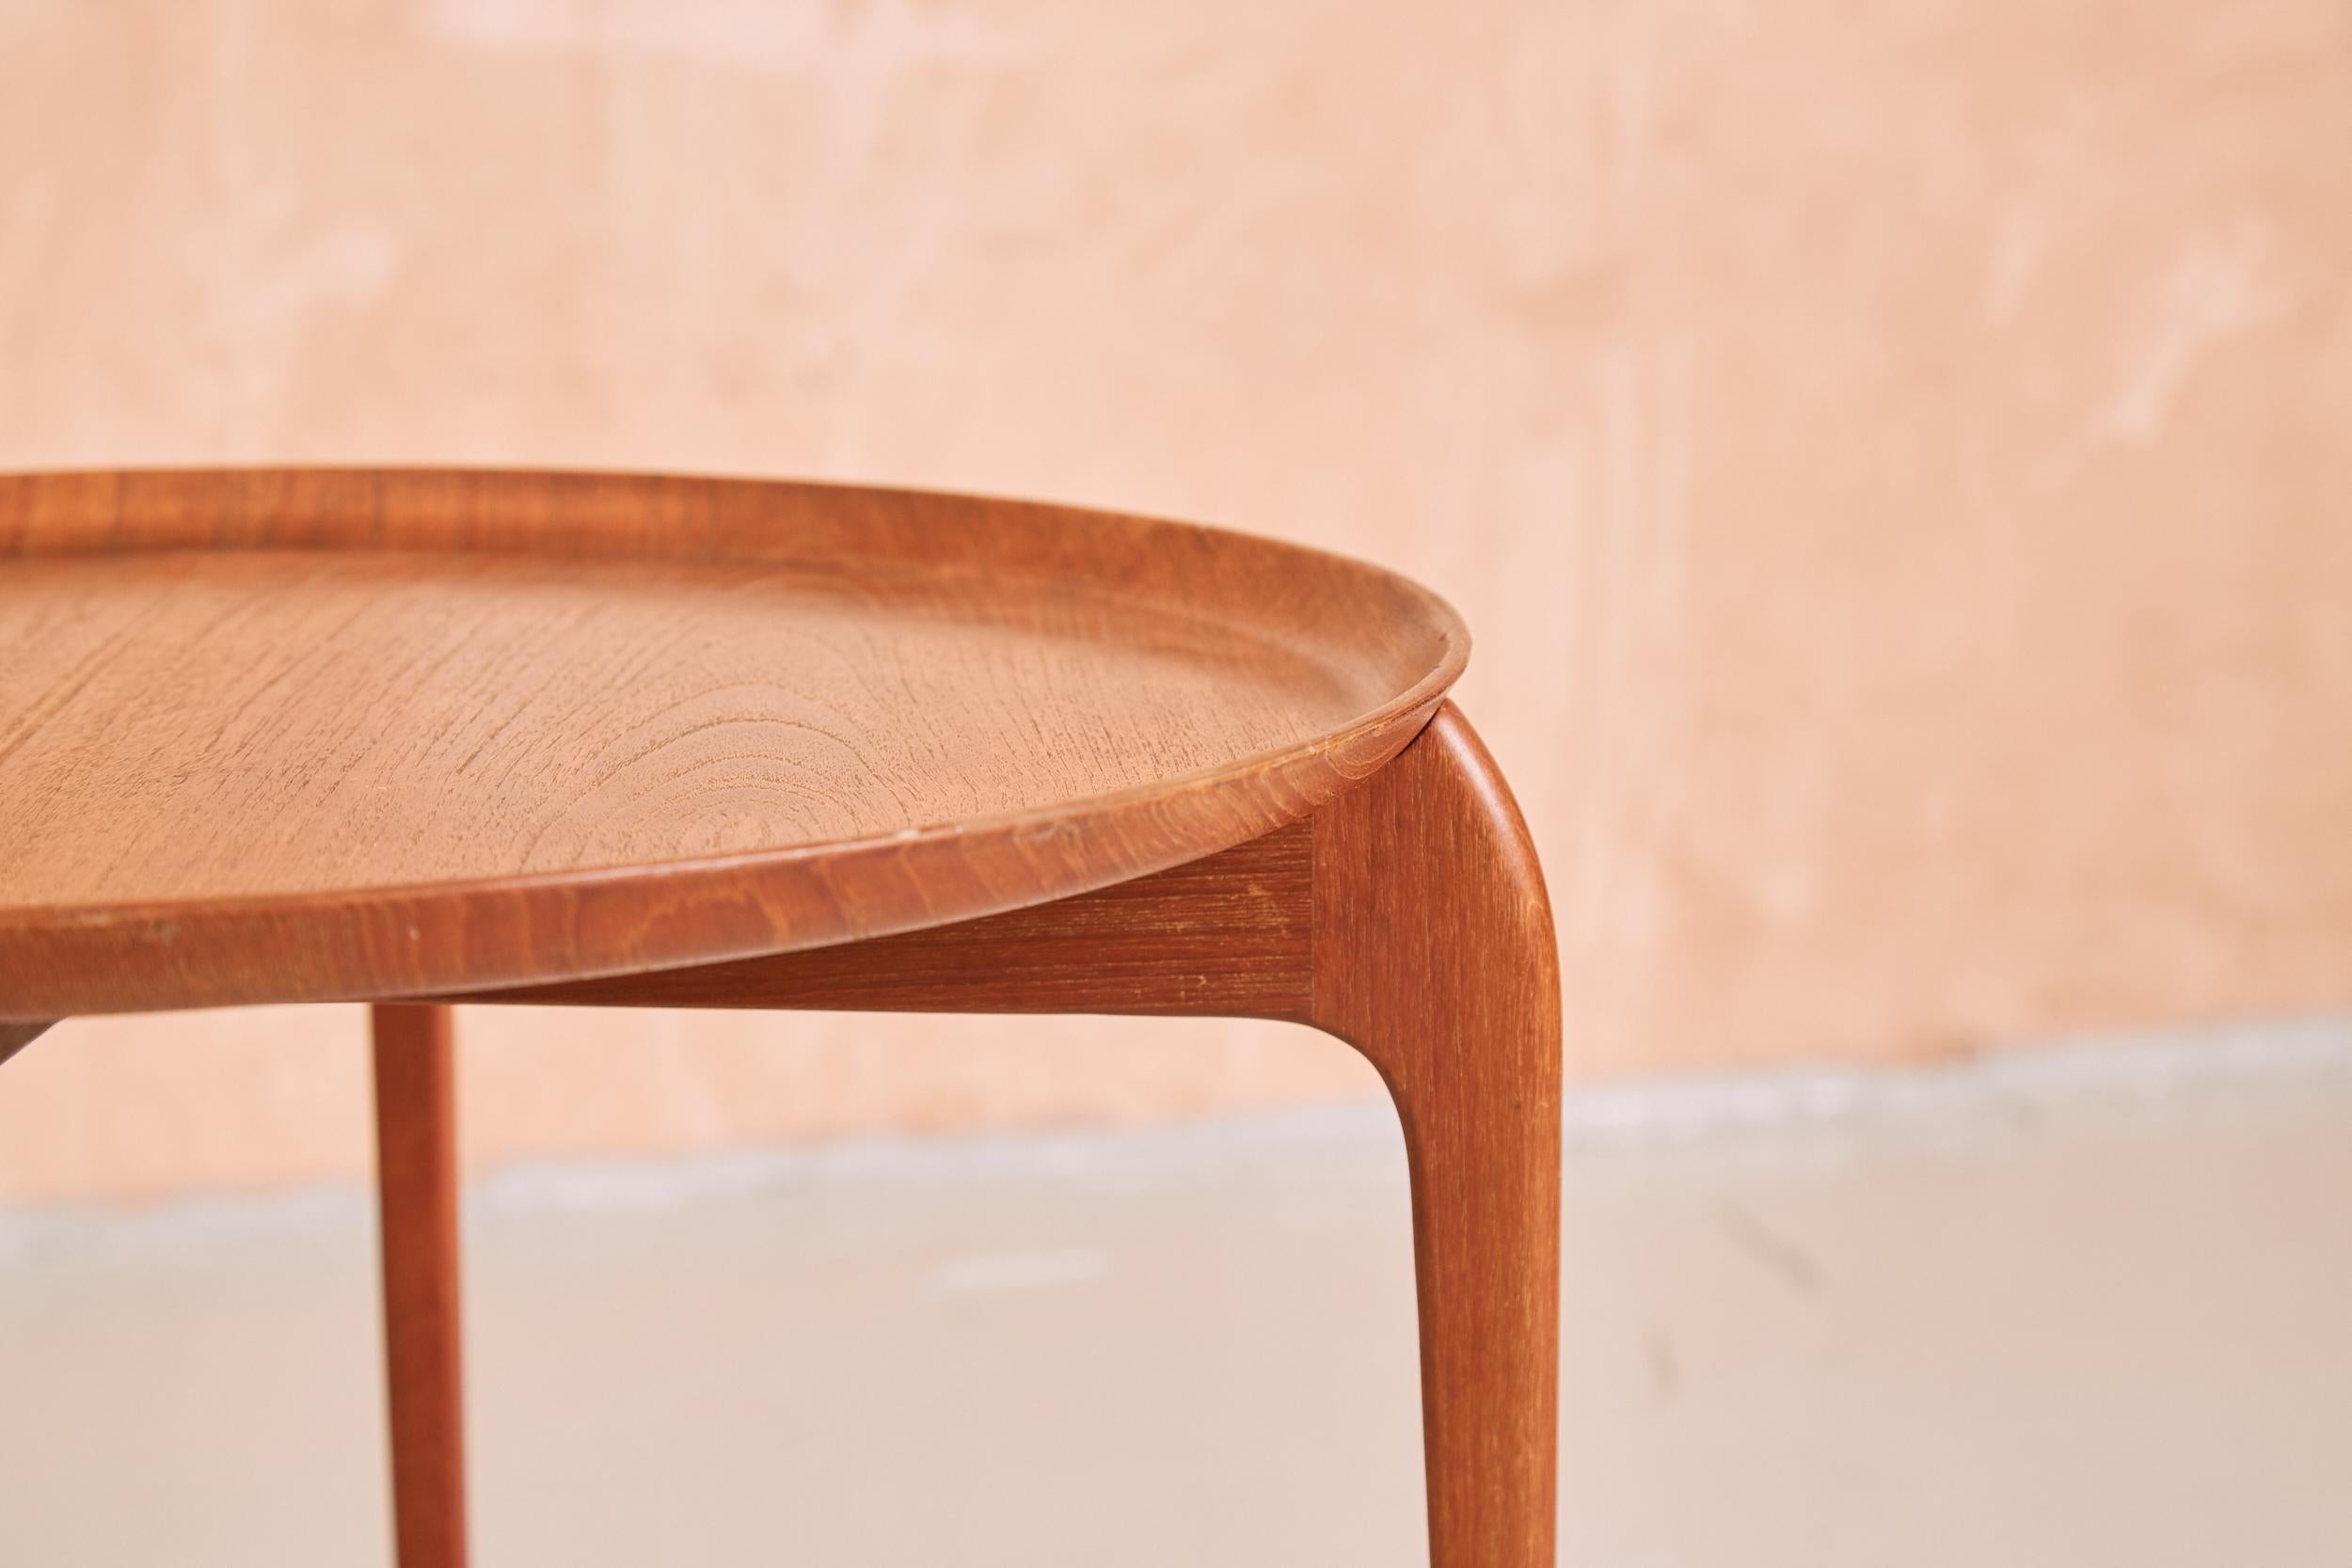 An elegant Danish mid century side table which doubles as a serving tray. The circular teak tray curves up at the edges for practicality but retains a delicate refined design, sitting on the haunches of the base, forming the top of four tapered